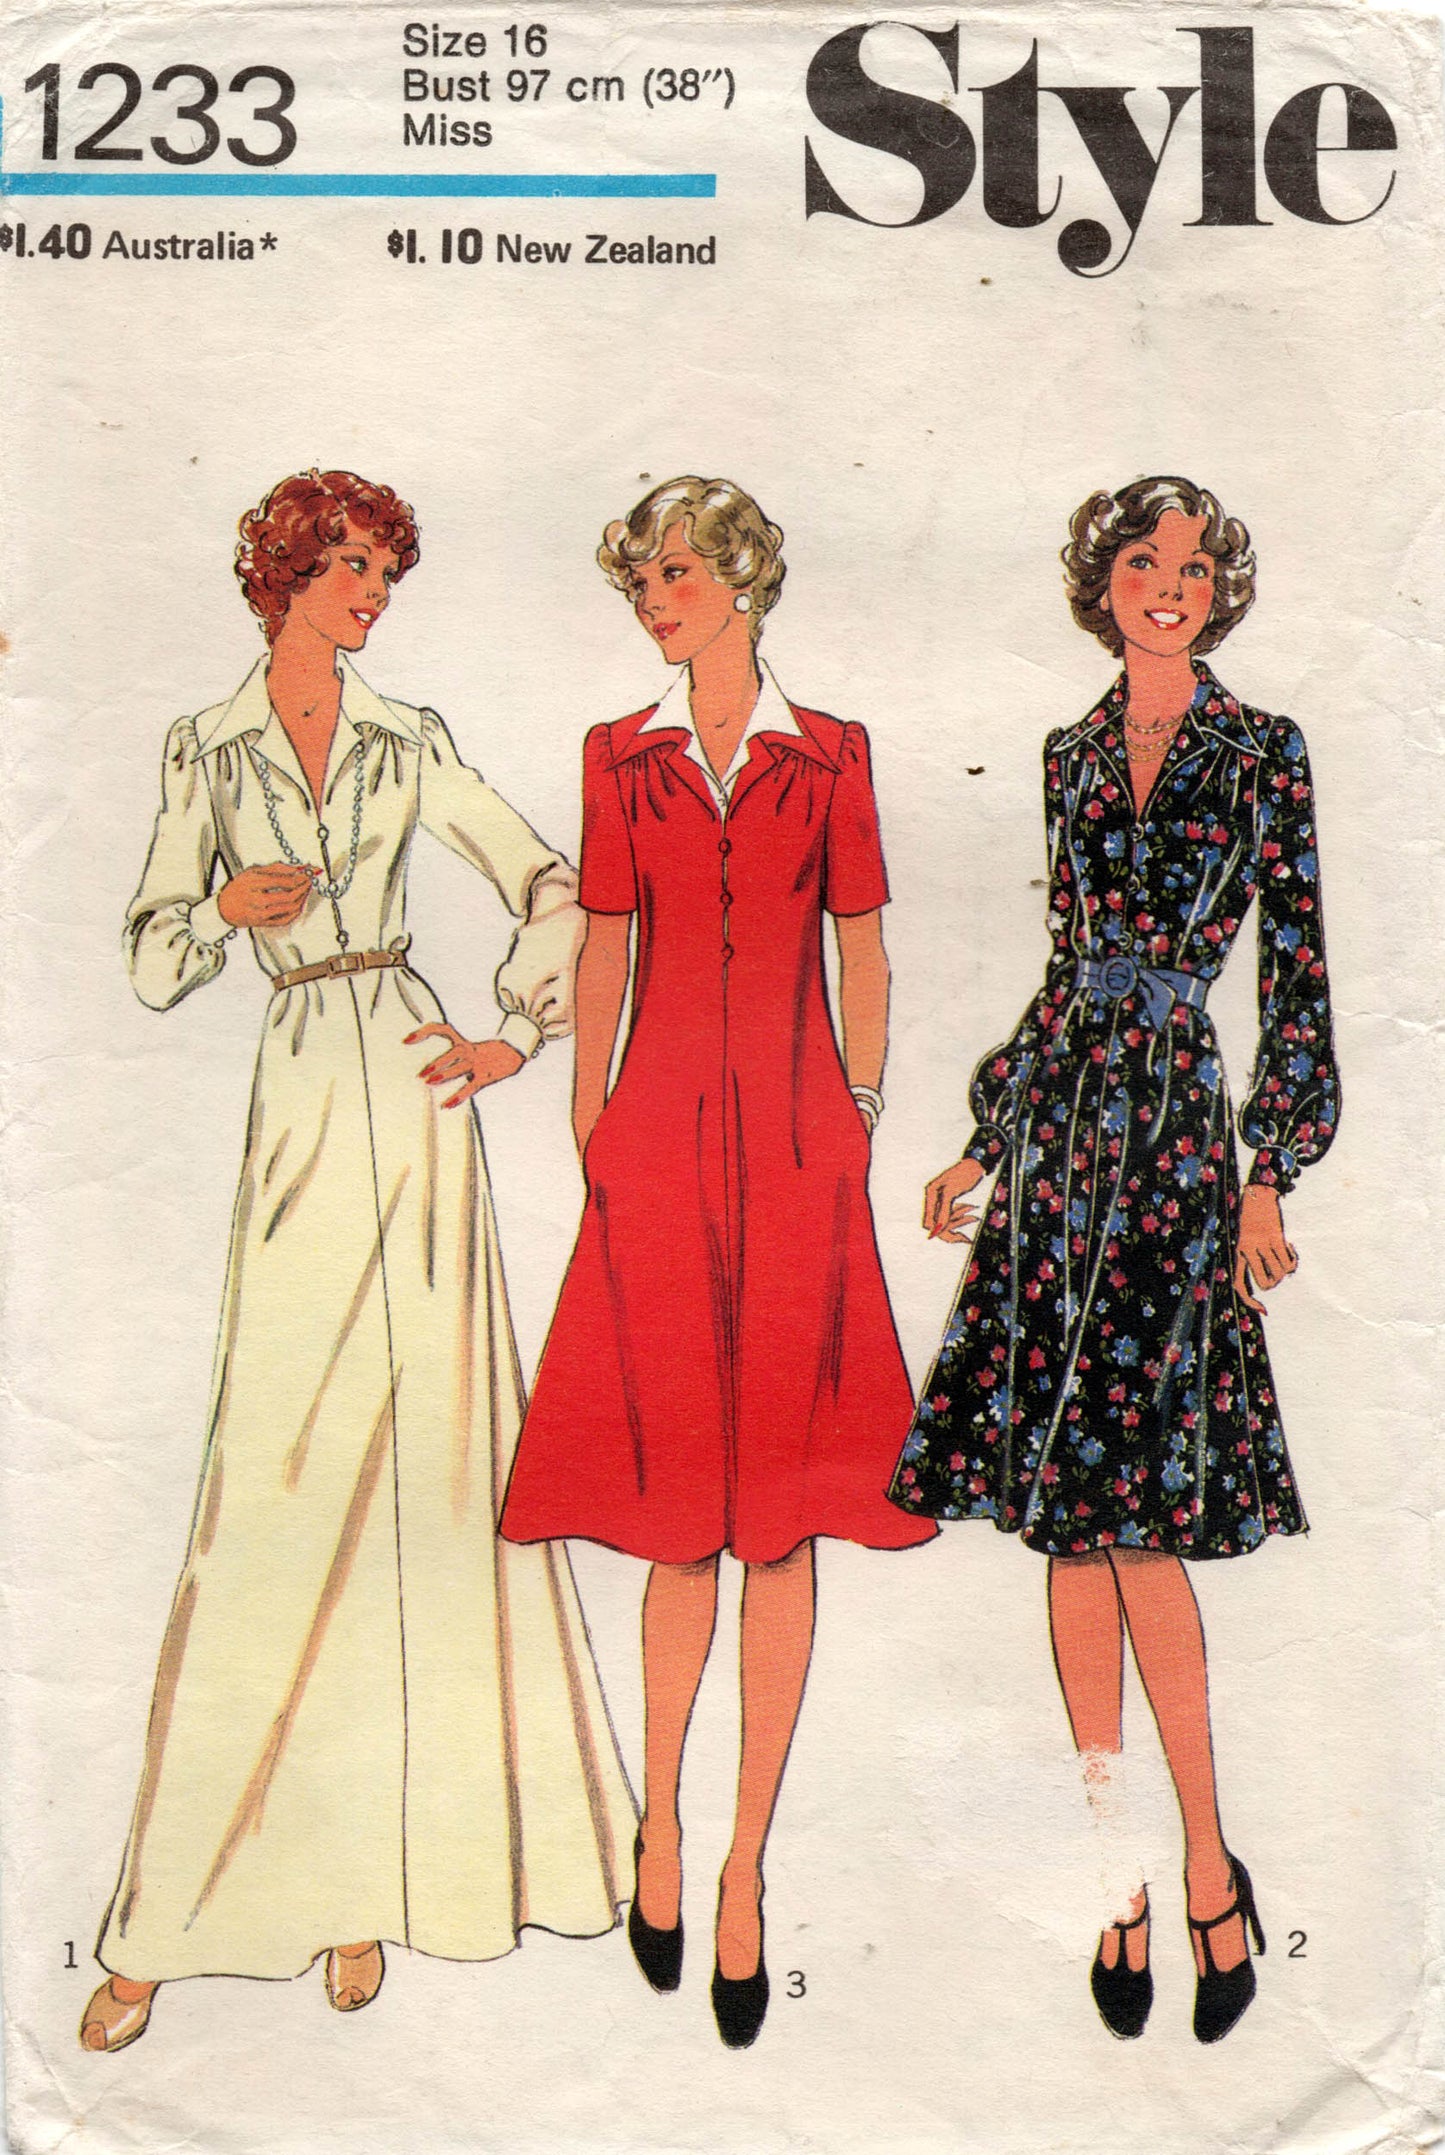 Style 1233 Womens Wide Collared Shirtdress / Maxi Dress with Pockets 1970s Vintage Sewing Pattern Size 12, 14 or 16